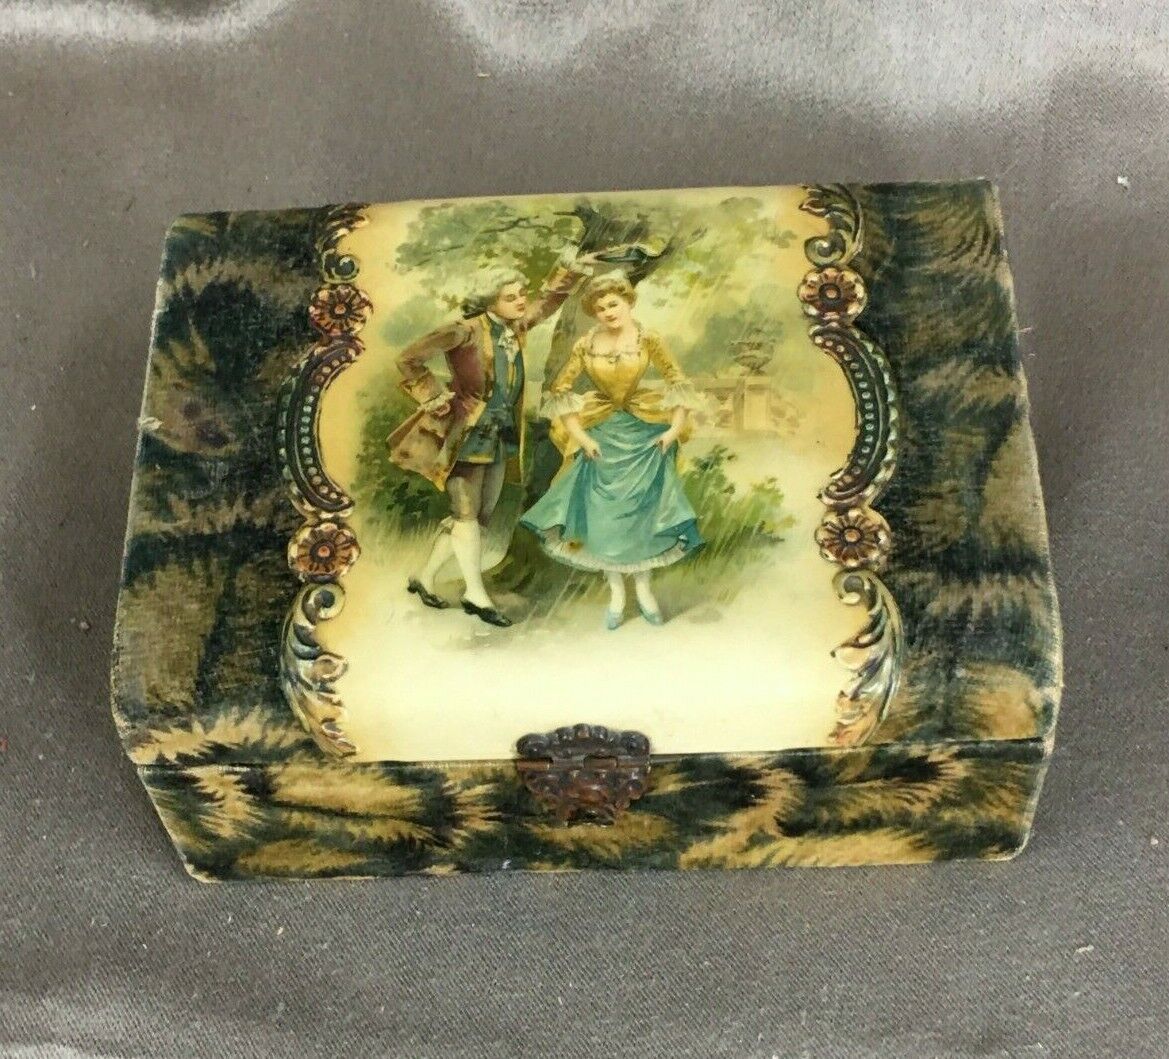 Antique Victorian Fabric Covered Jewelry Box w/ Painted Fragonard-Style Design